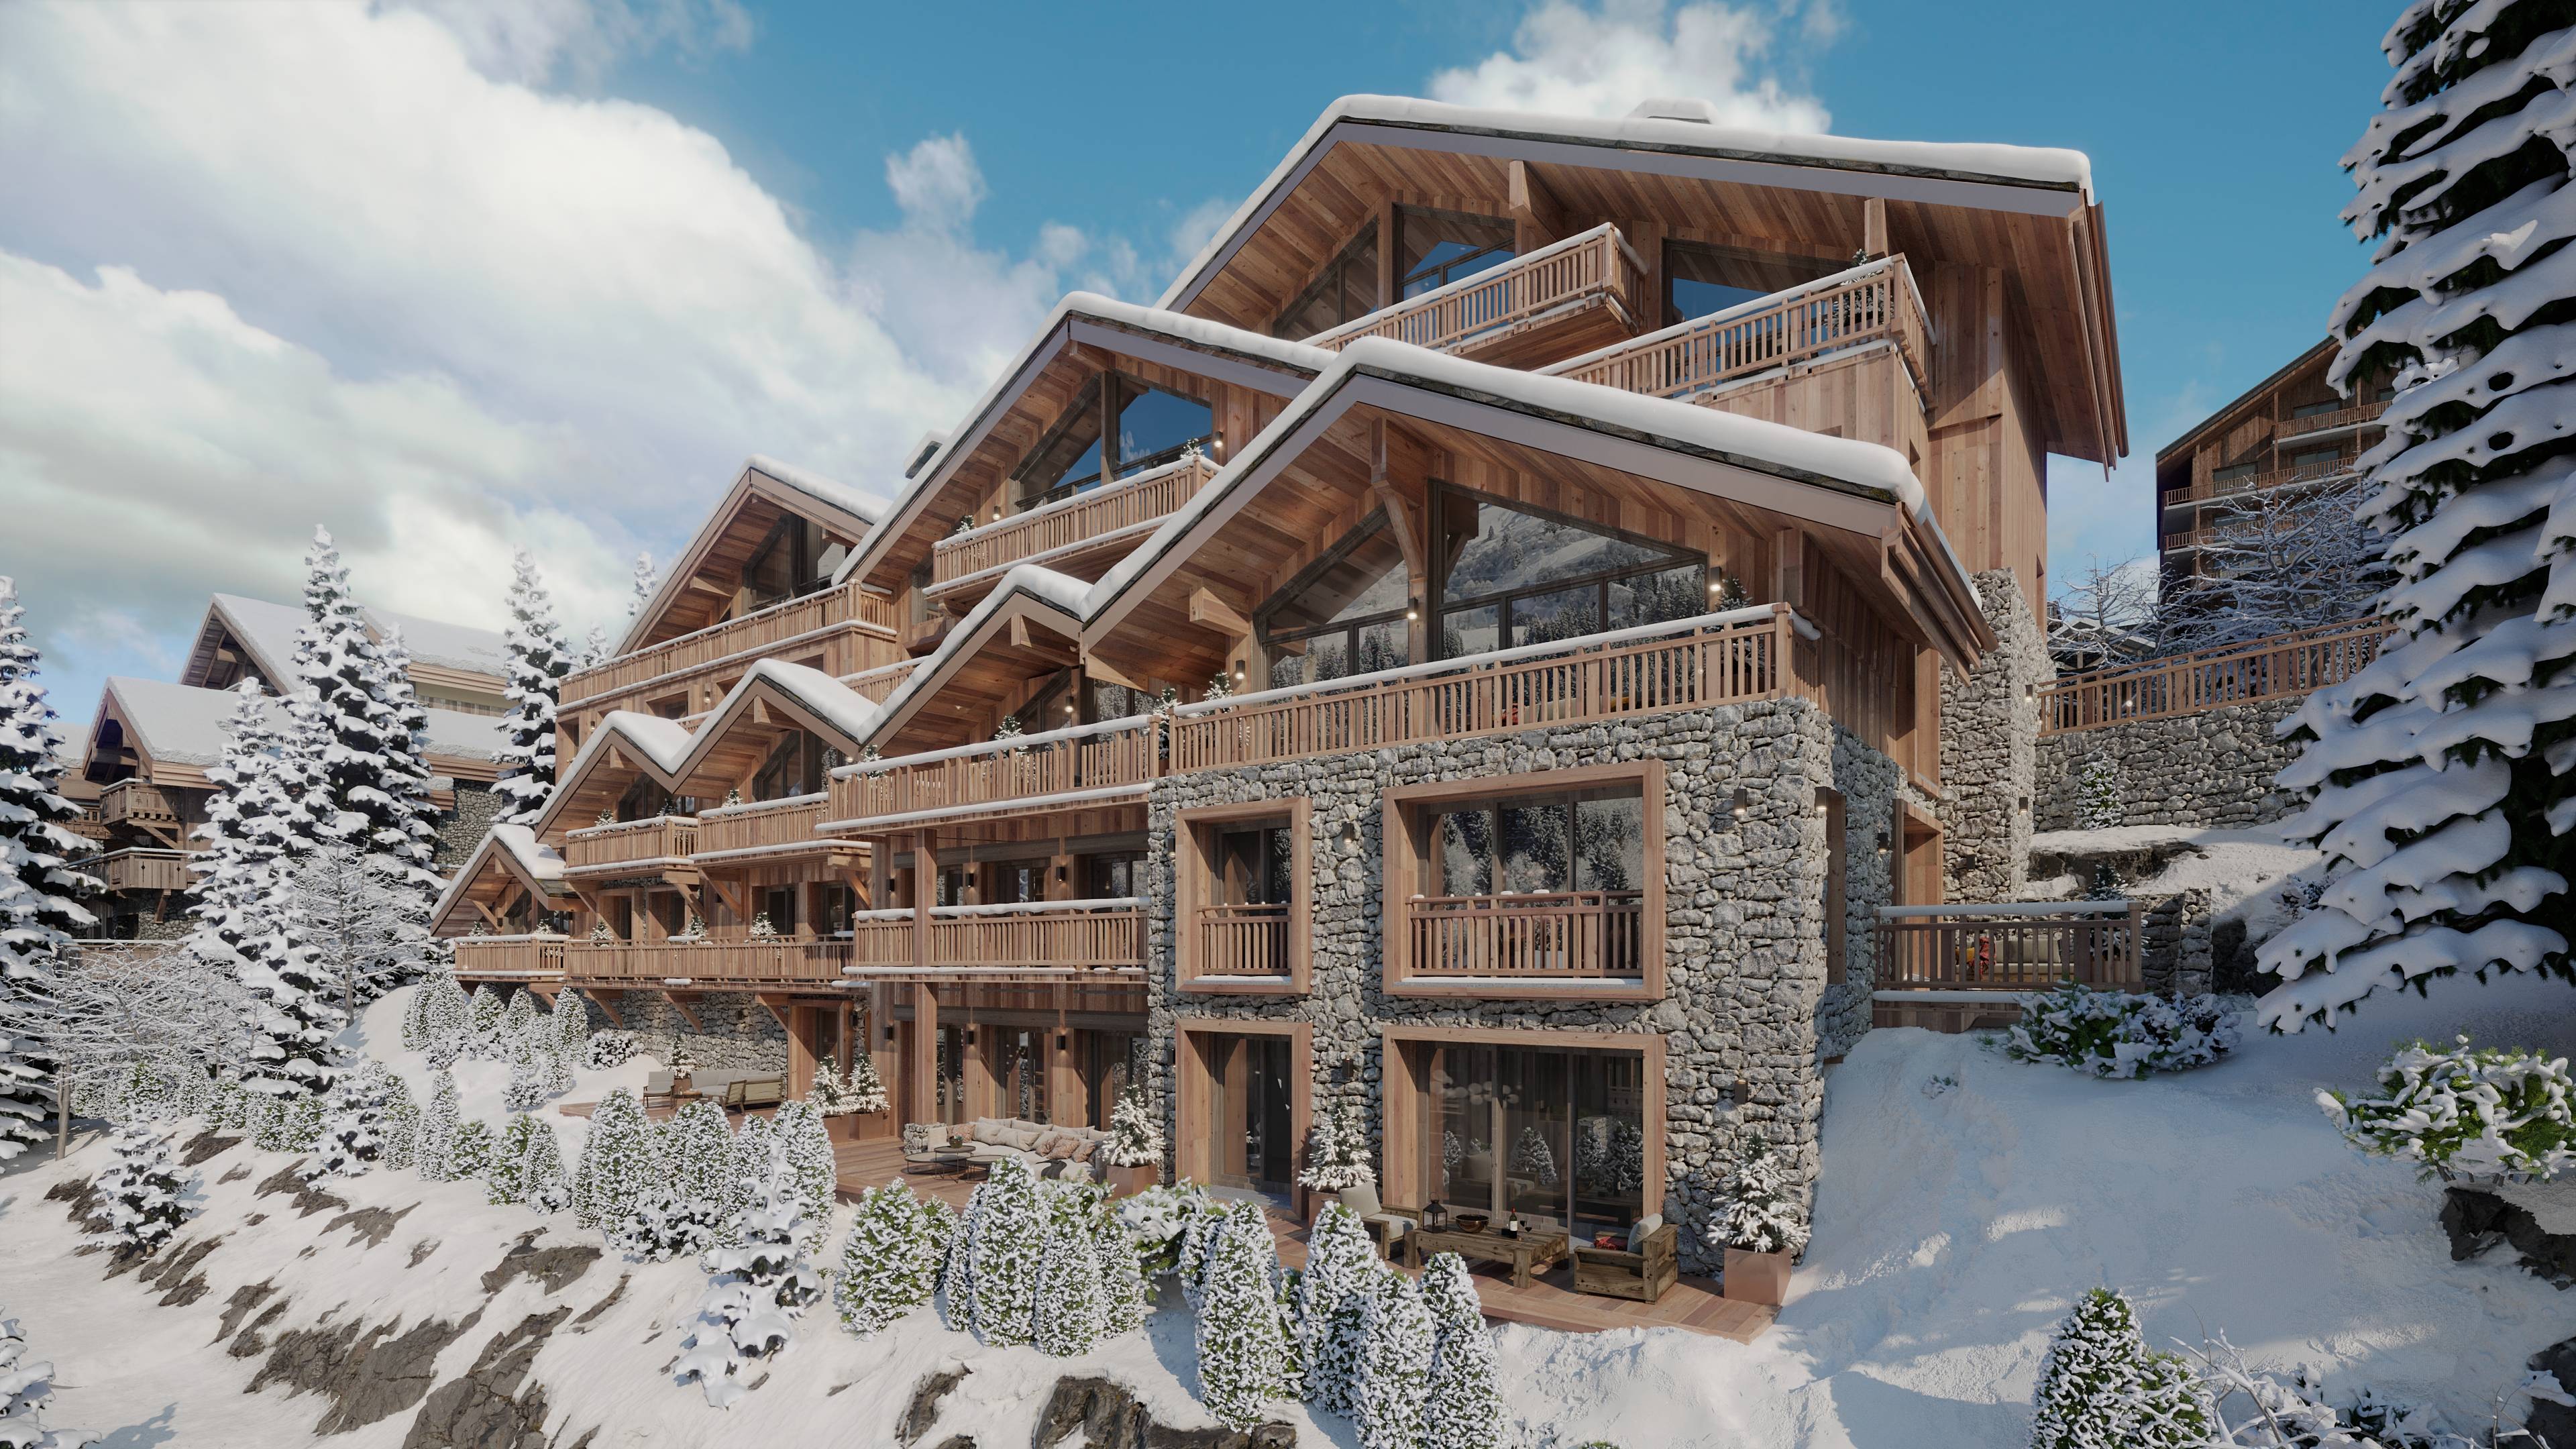 Introducing the Ultimate Alpine Getaway: A Luxurious Chalet-Style Condo in Meribel's 3 Valleys